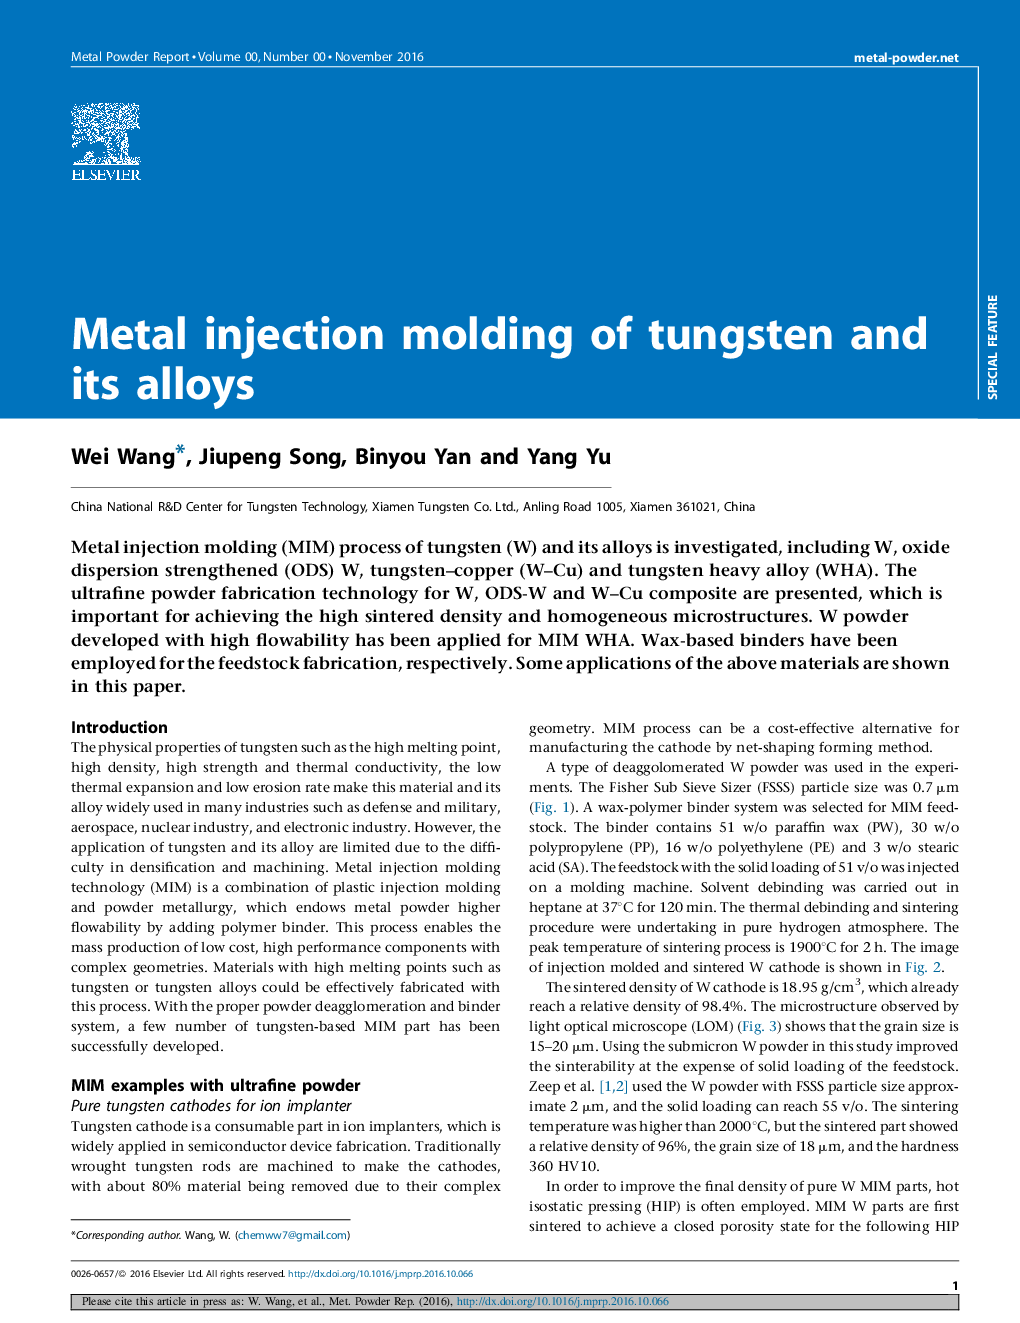 Metal injection molding of tungsten and its alloys